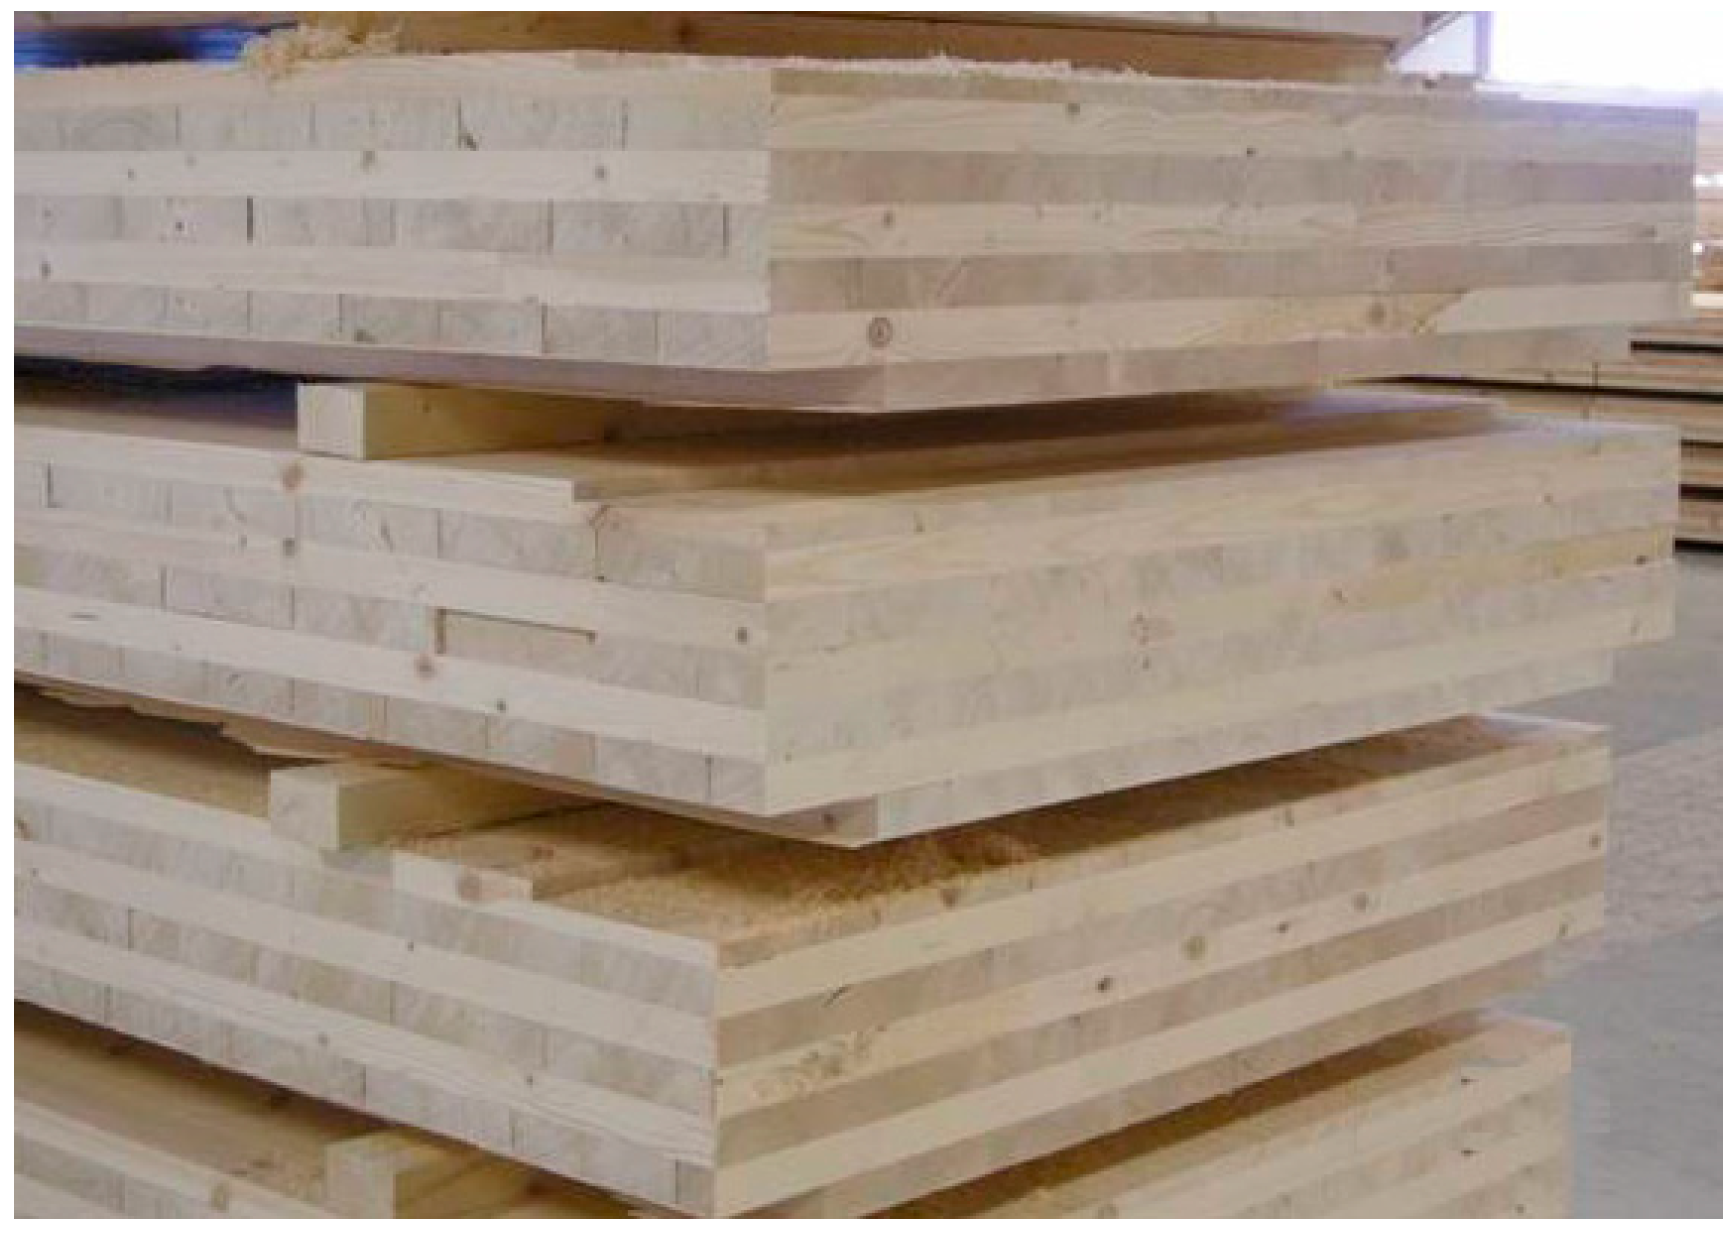 Sustainability | Free Full-Text | Assessing Cross Laminated Timber (CLT) as an Alternative Material for Mid-Rise Residential Buildings in Regions in China—A Life-Cycle Assessment Approach